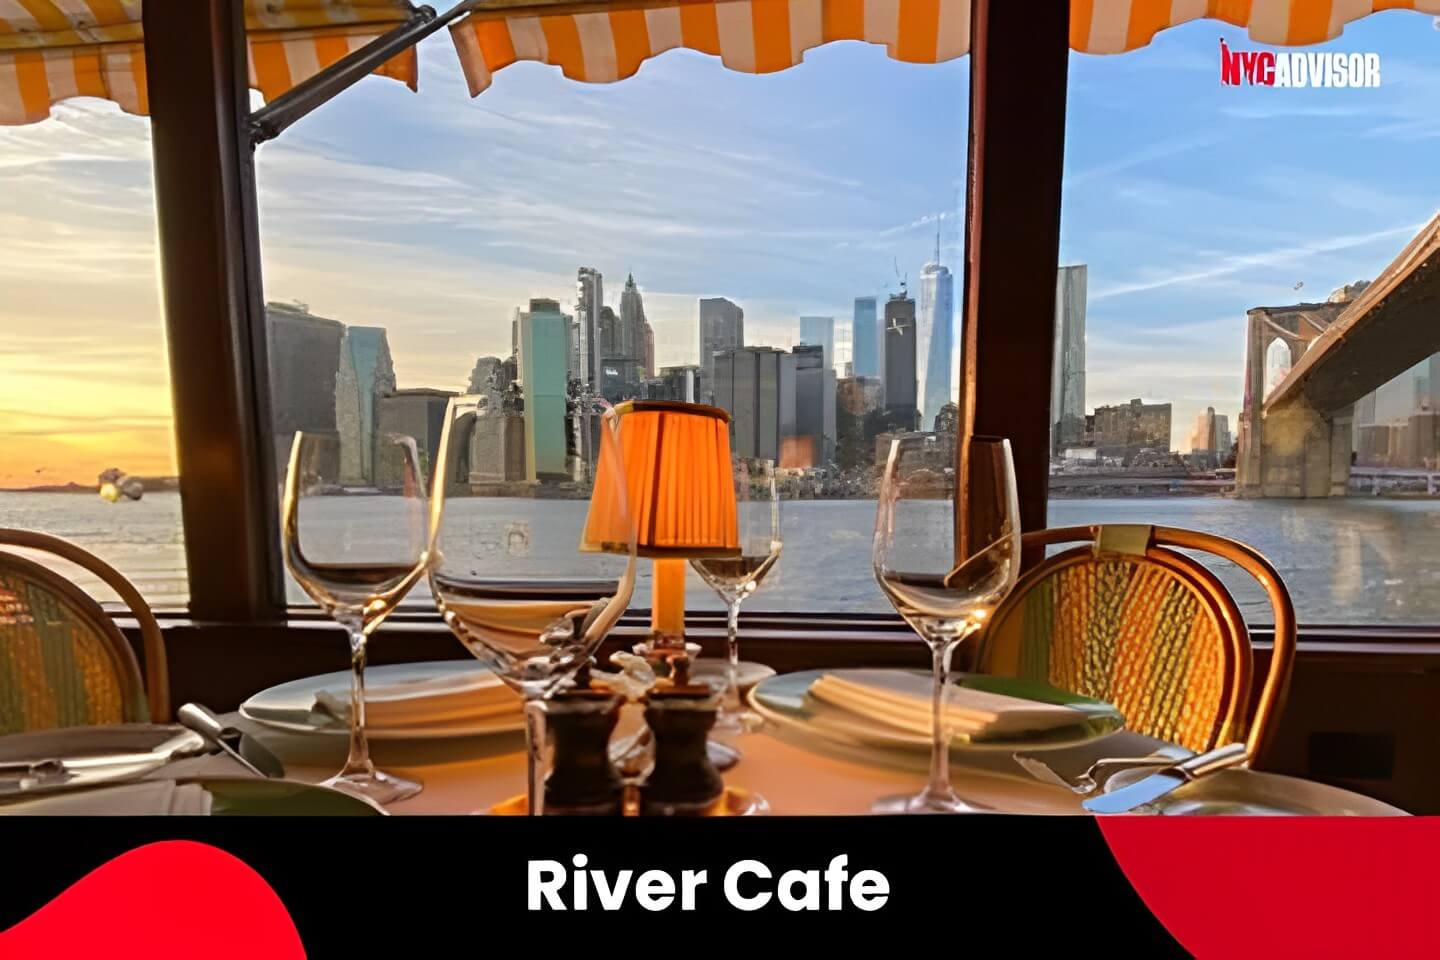 River Cafe in New York City